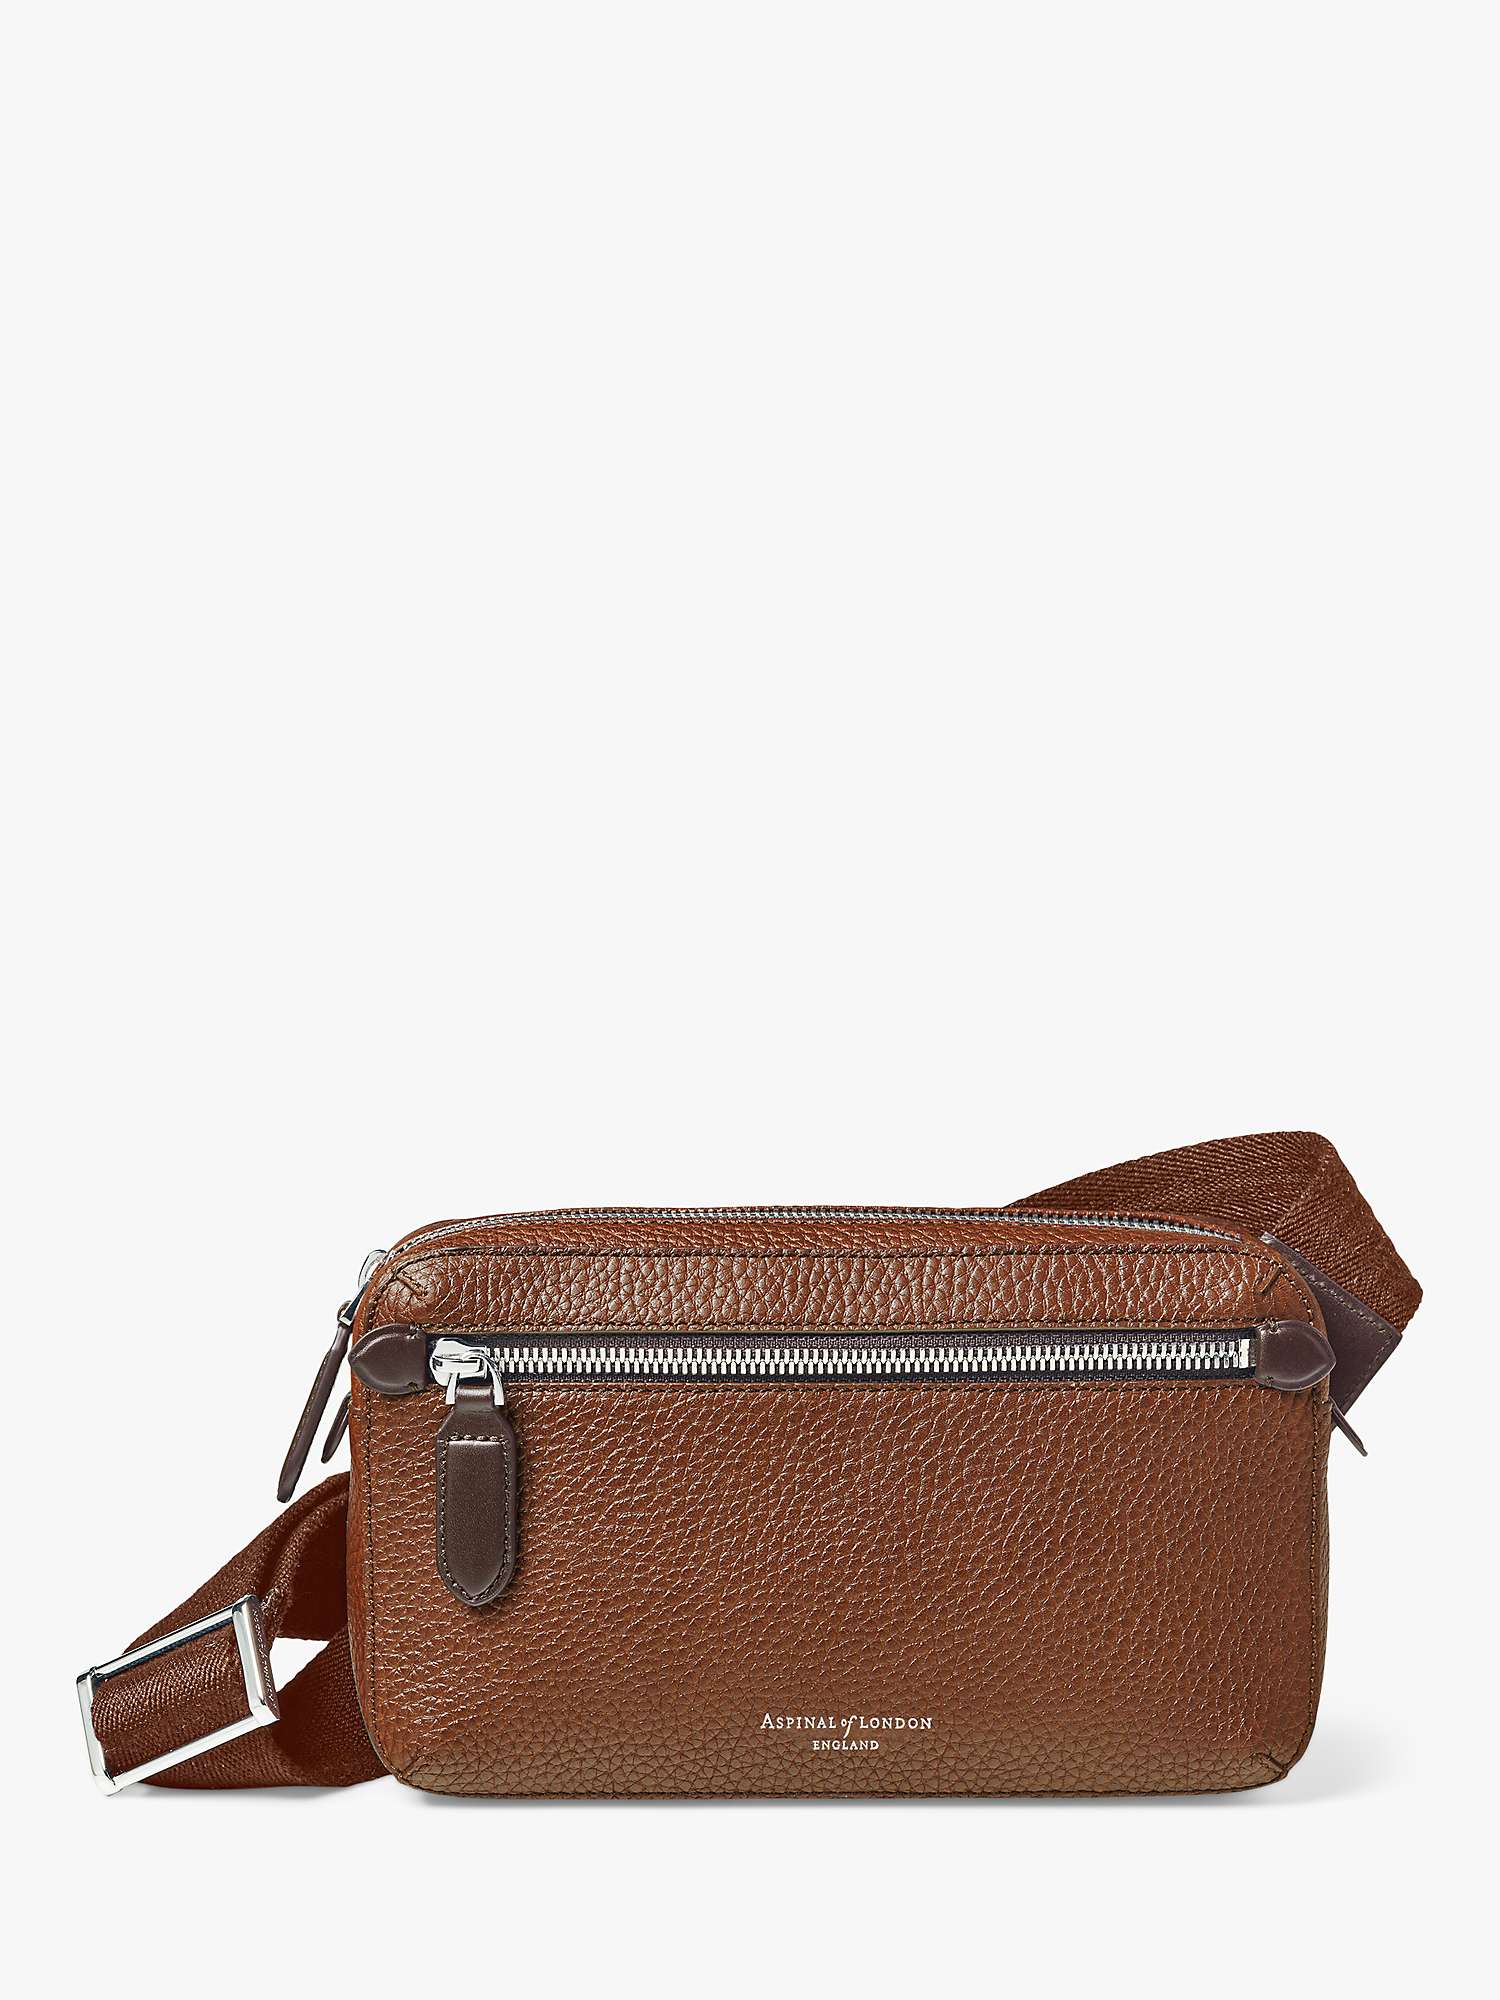 Buy Aspinal of London Compact Pebble Leather Reporter Bag, Tobacco Online at johnlewis.com